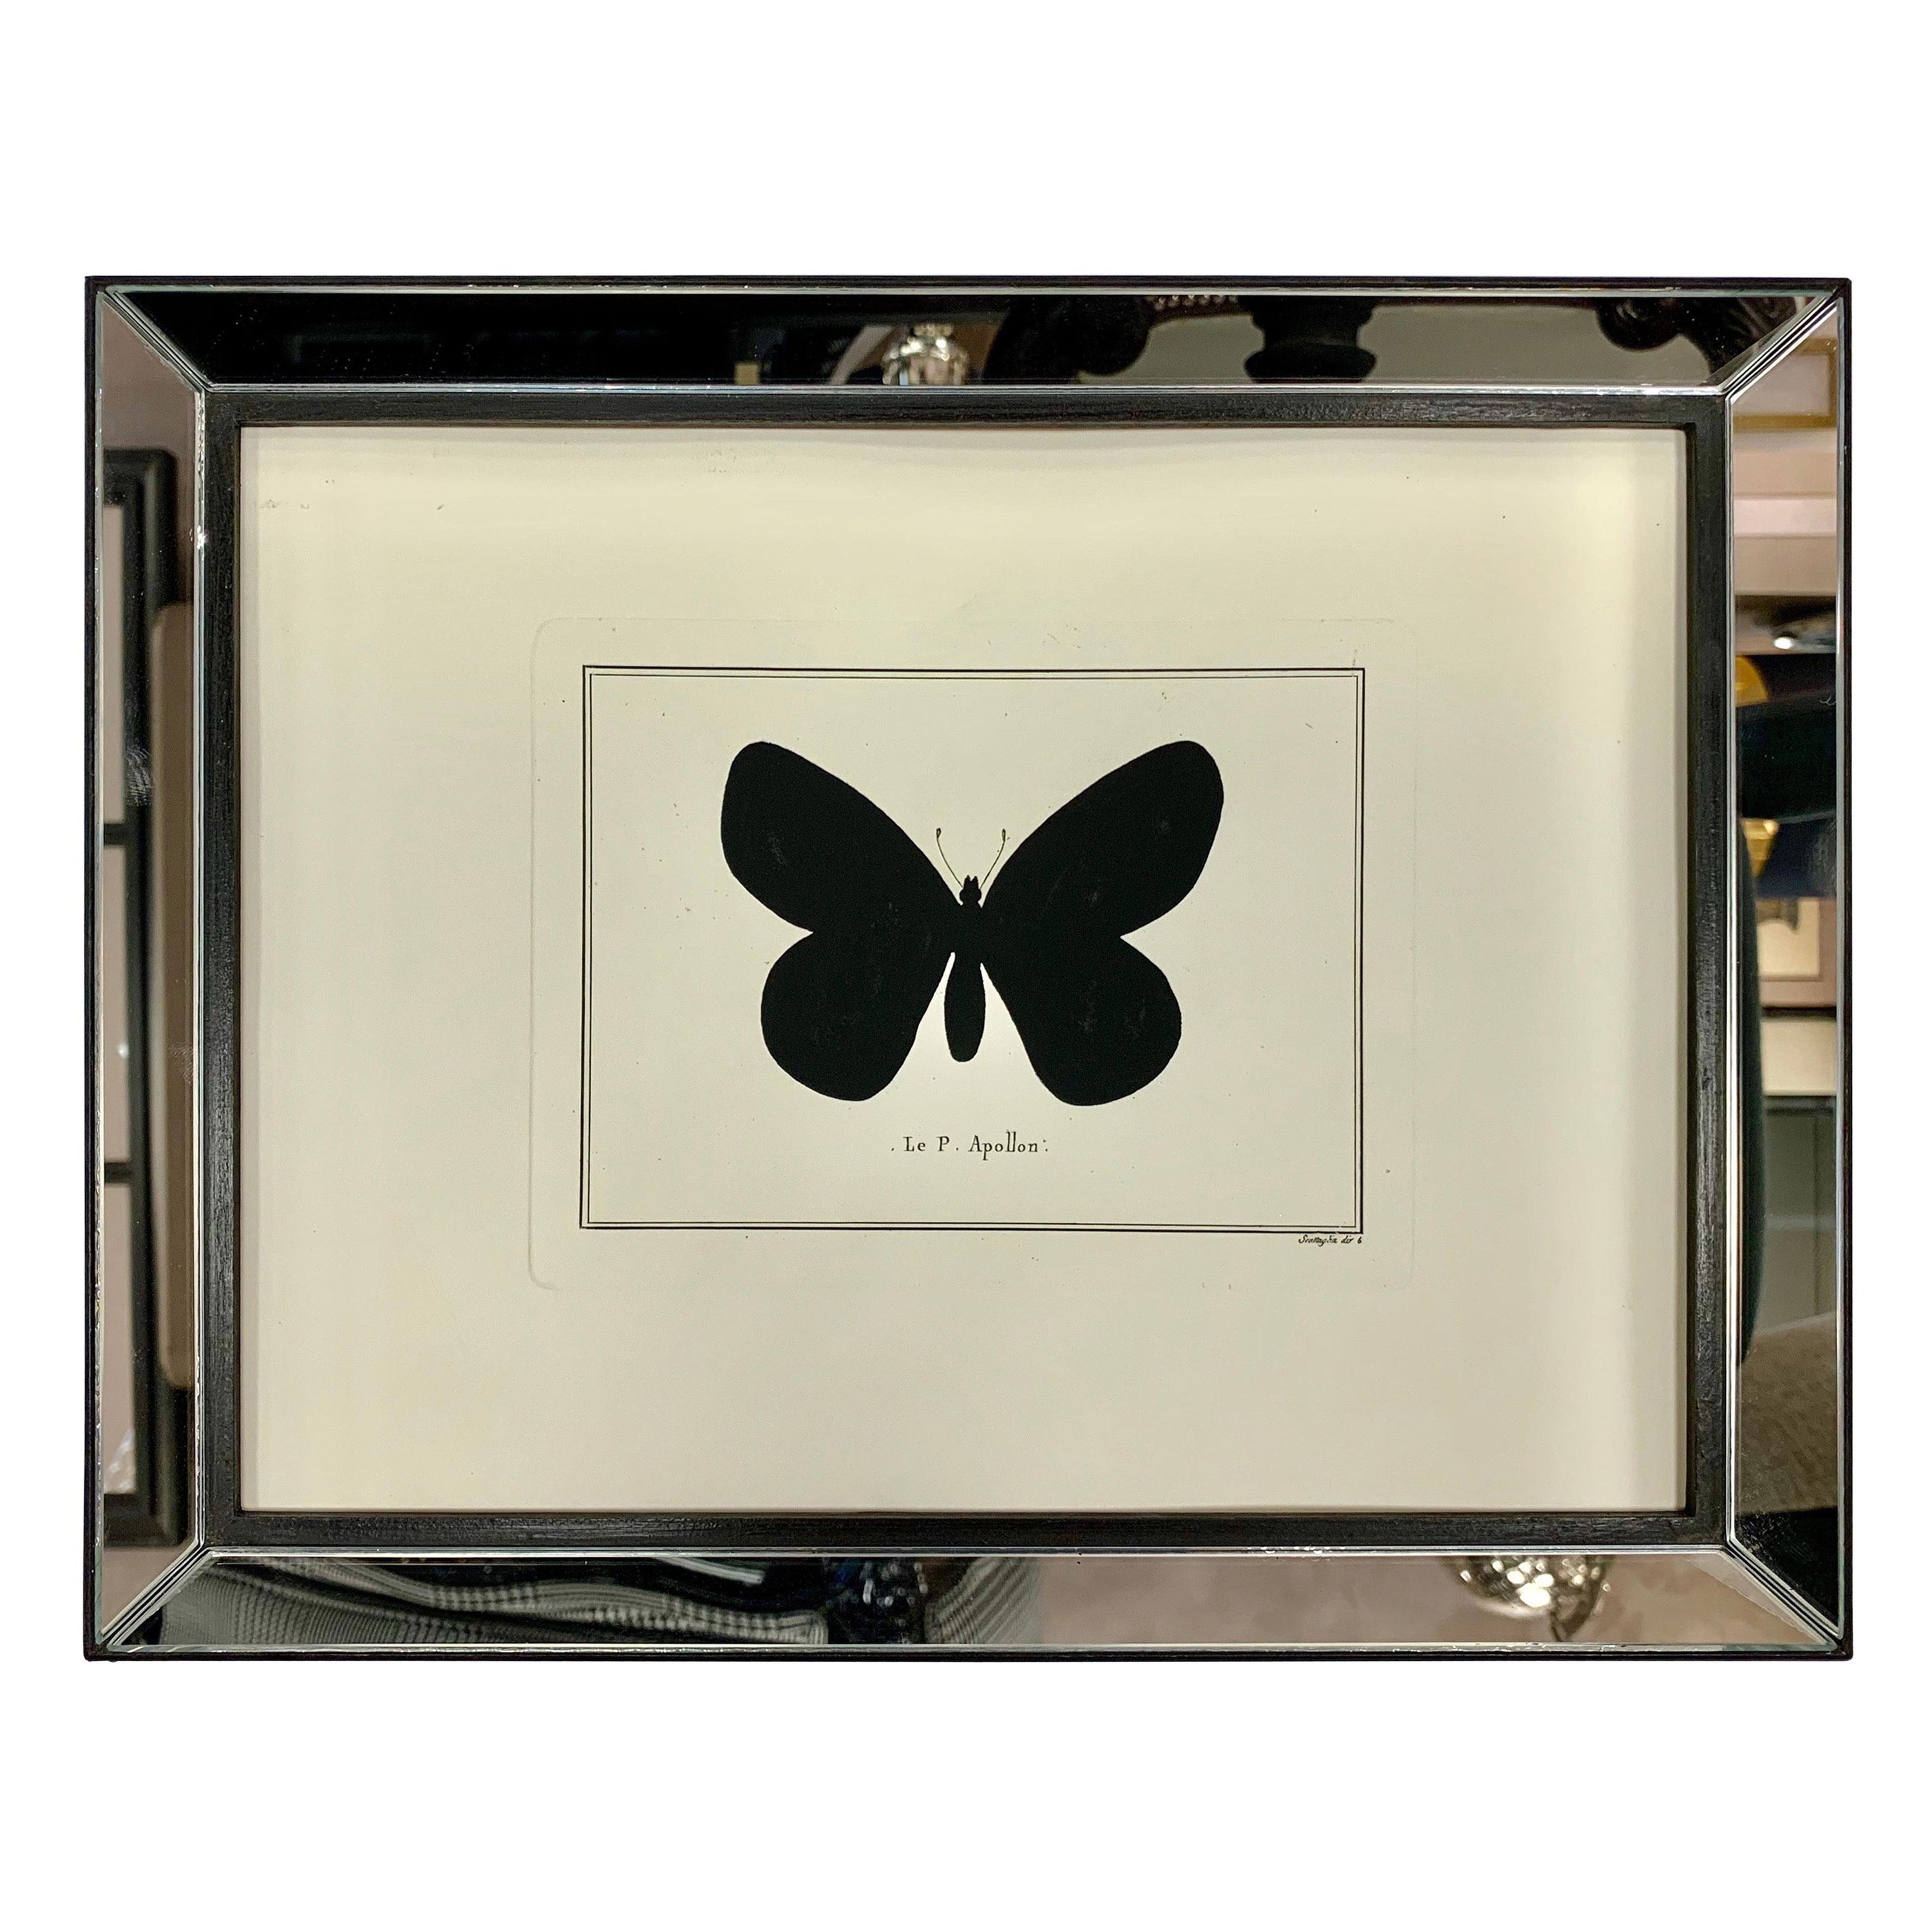 Contemporary Italian Hand Watercolored Apollon Butterfly Print with Mirror Frame